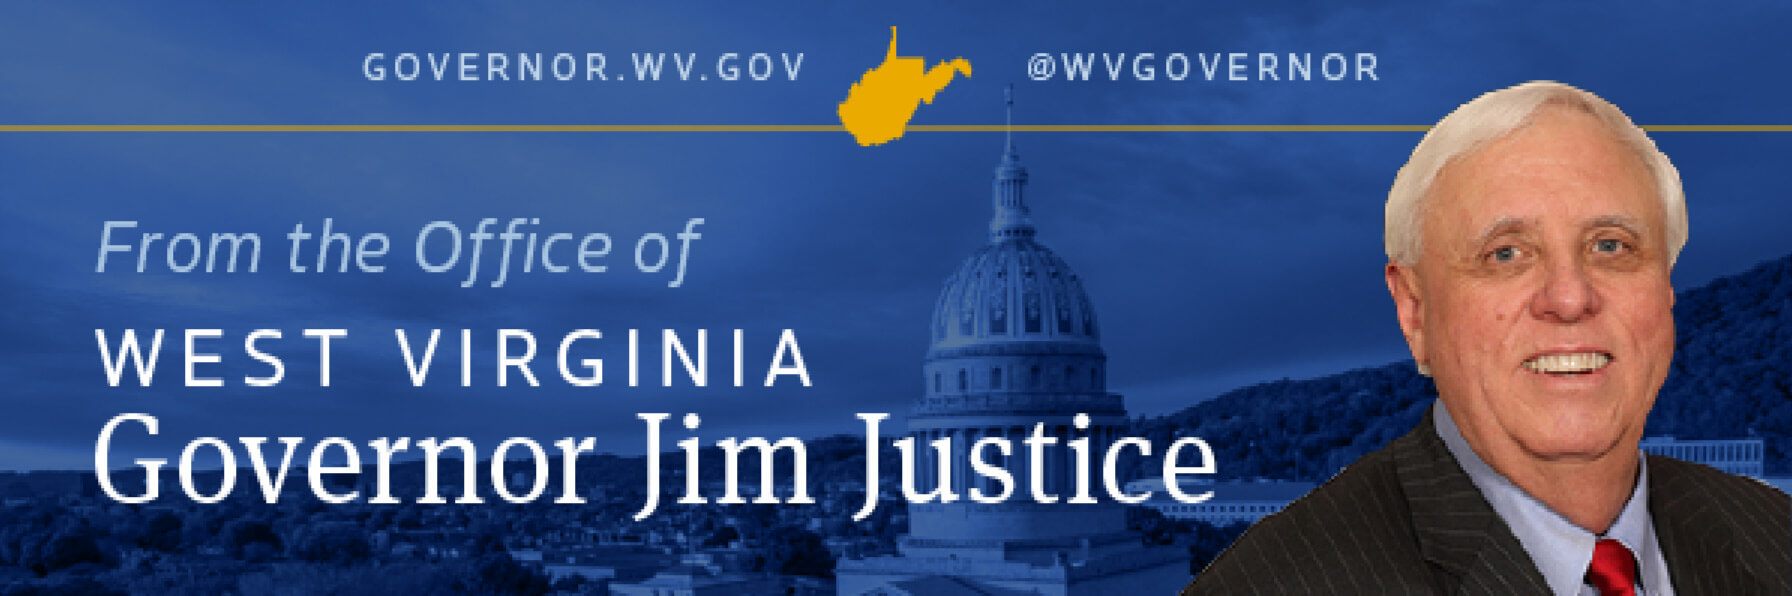 From the Office of West Virginia Governor Jim Justice